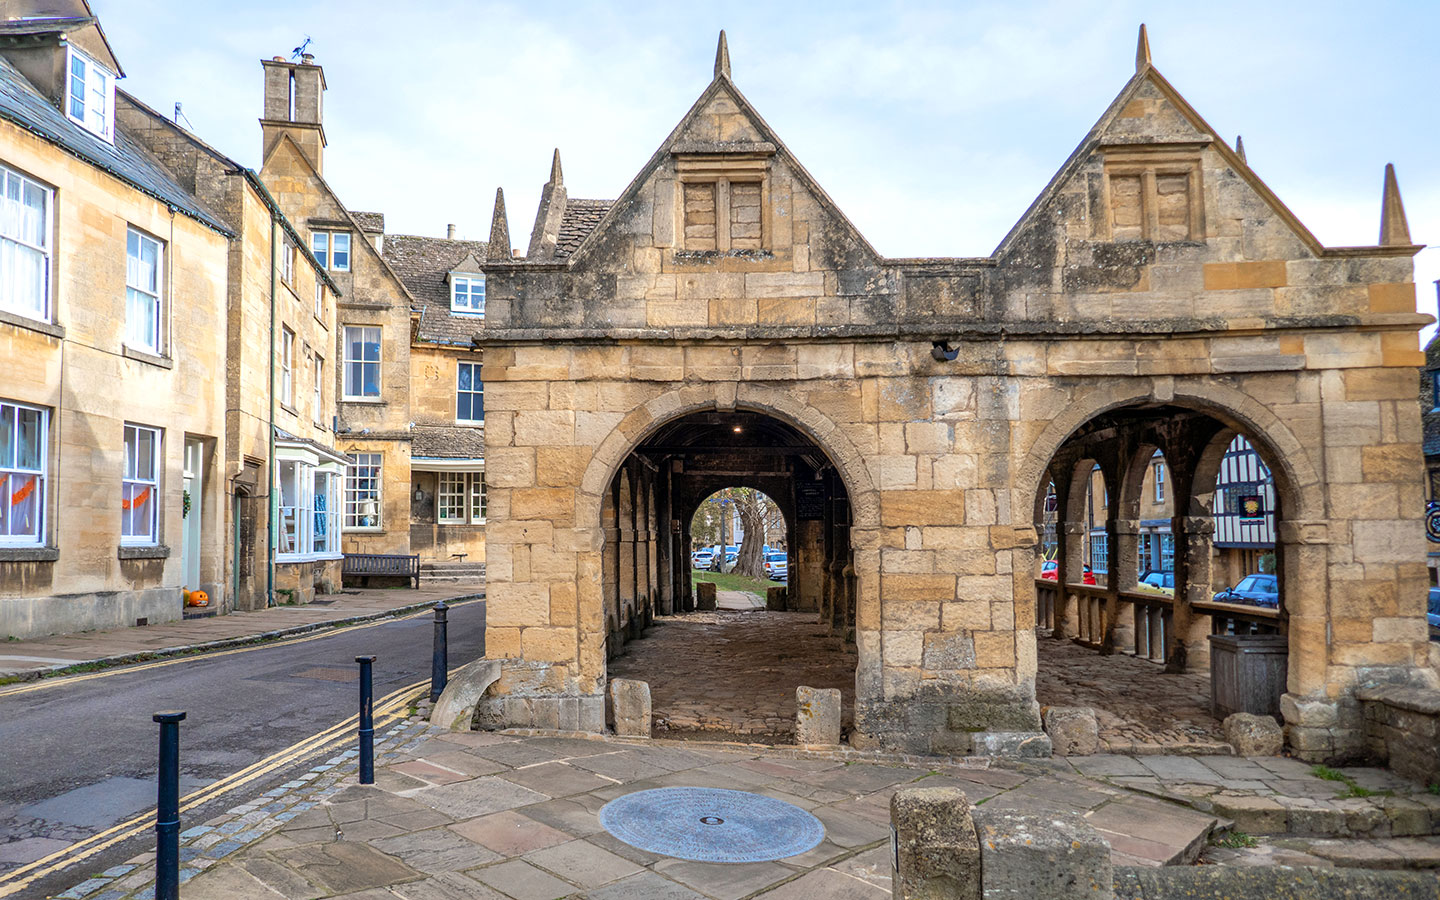 Chipping Campden Market Hall in the Cotswolds